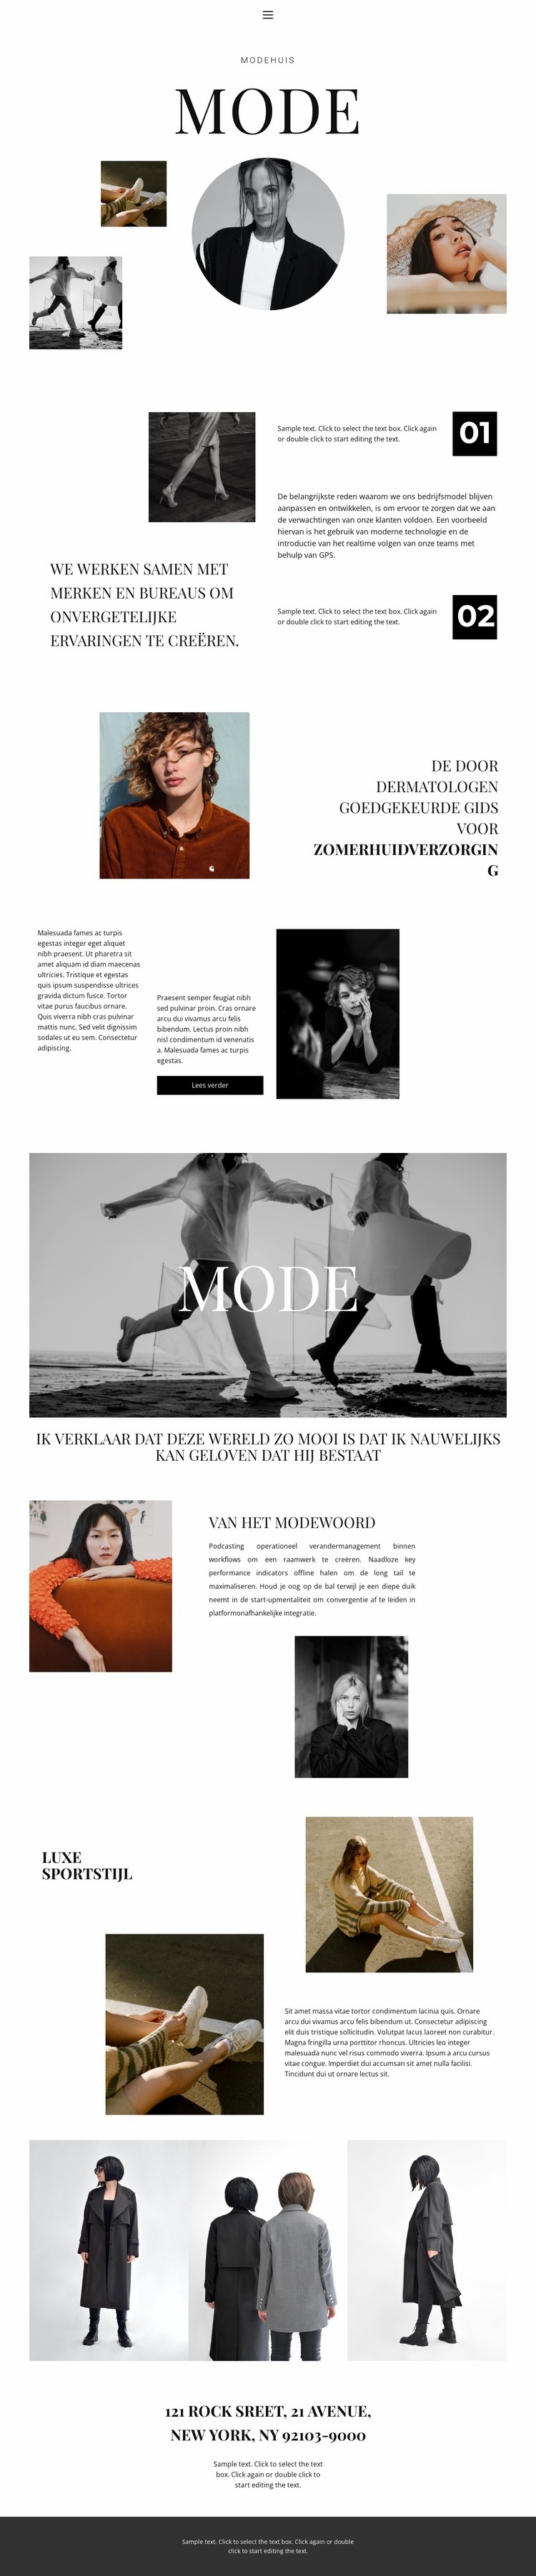 Alles over luxe mode HTML5-sjabloon